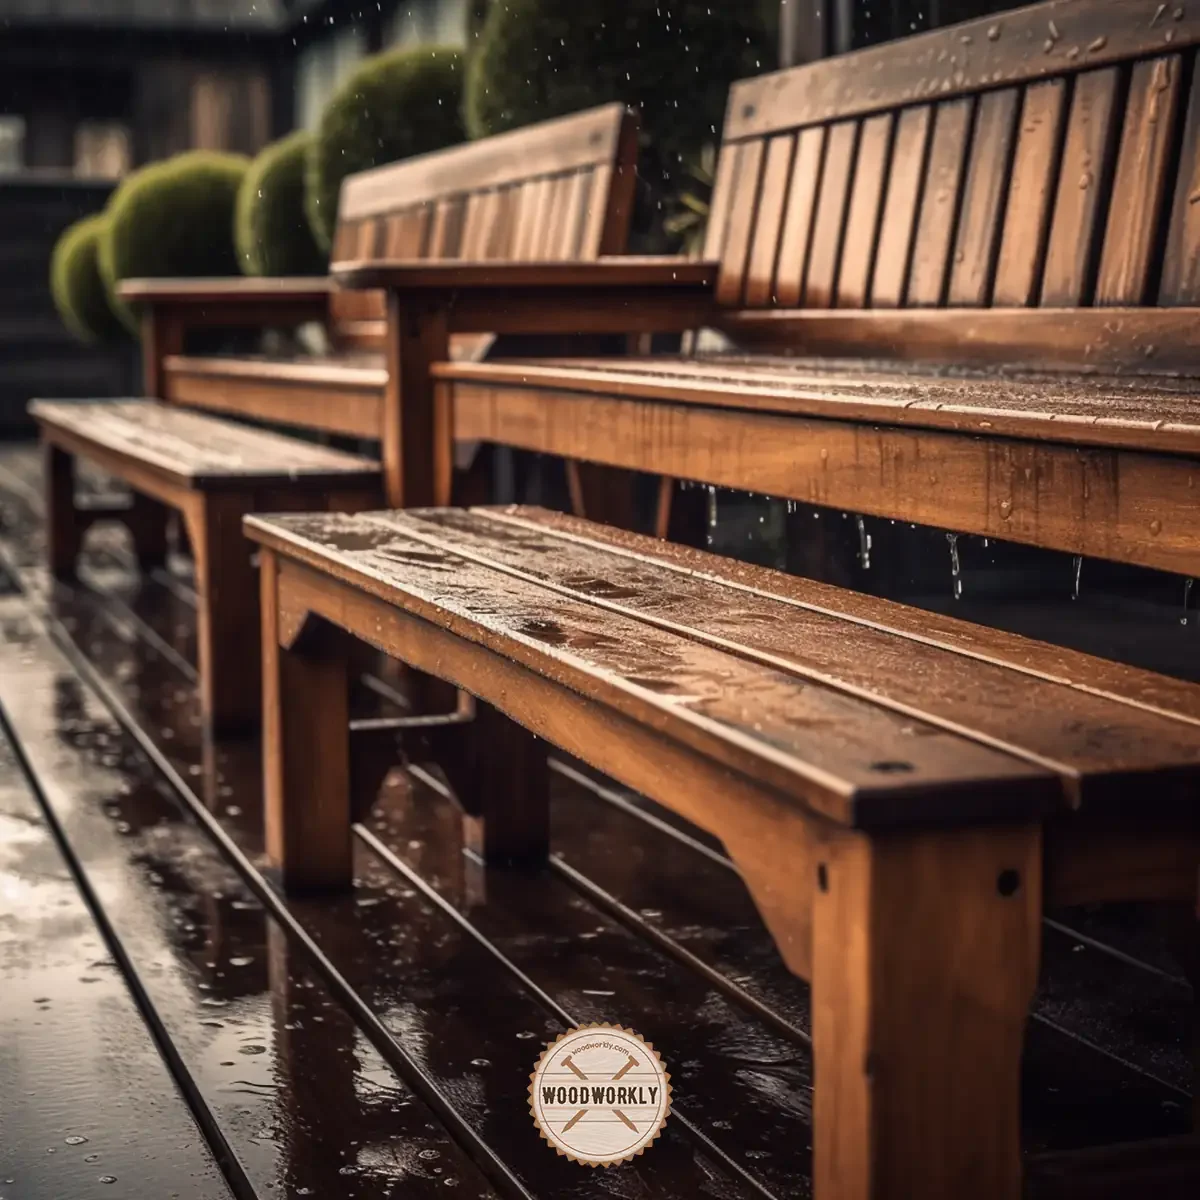 Wooden desk and benches impacted by the rainy weather